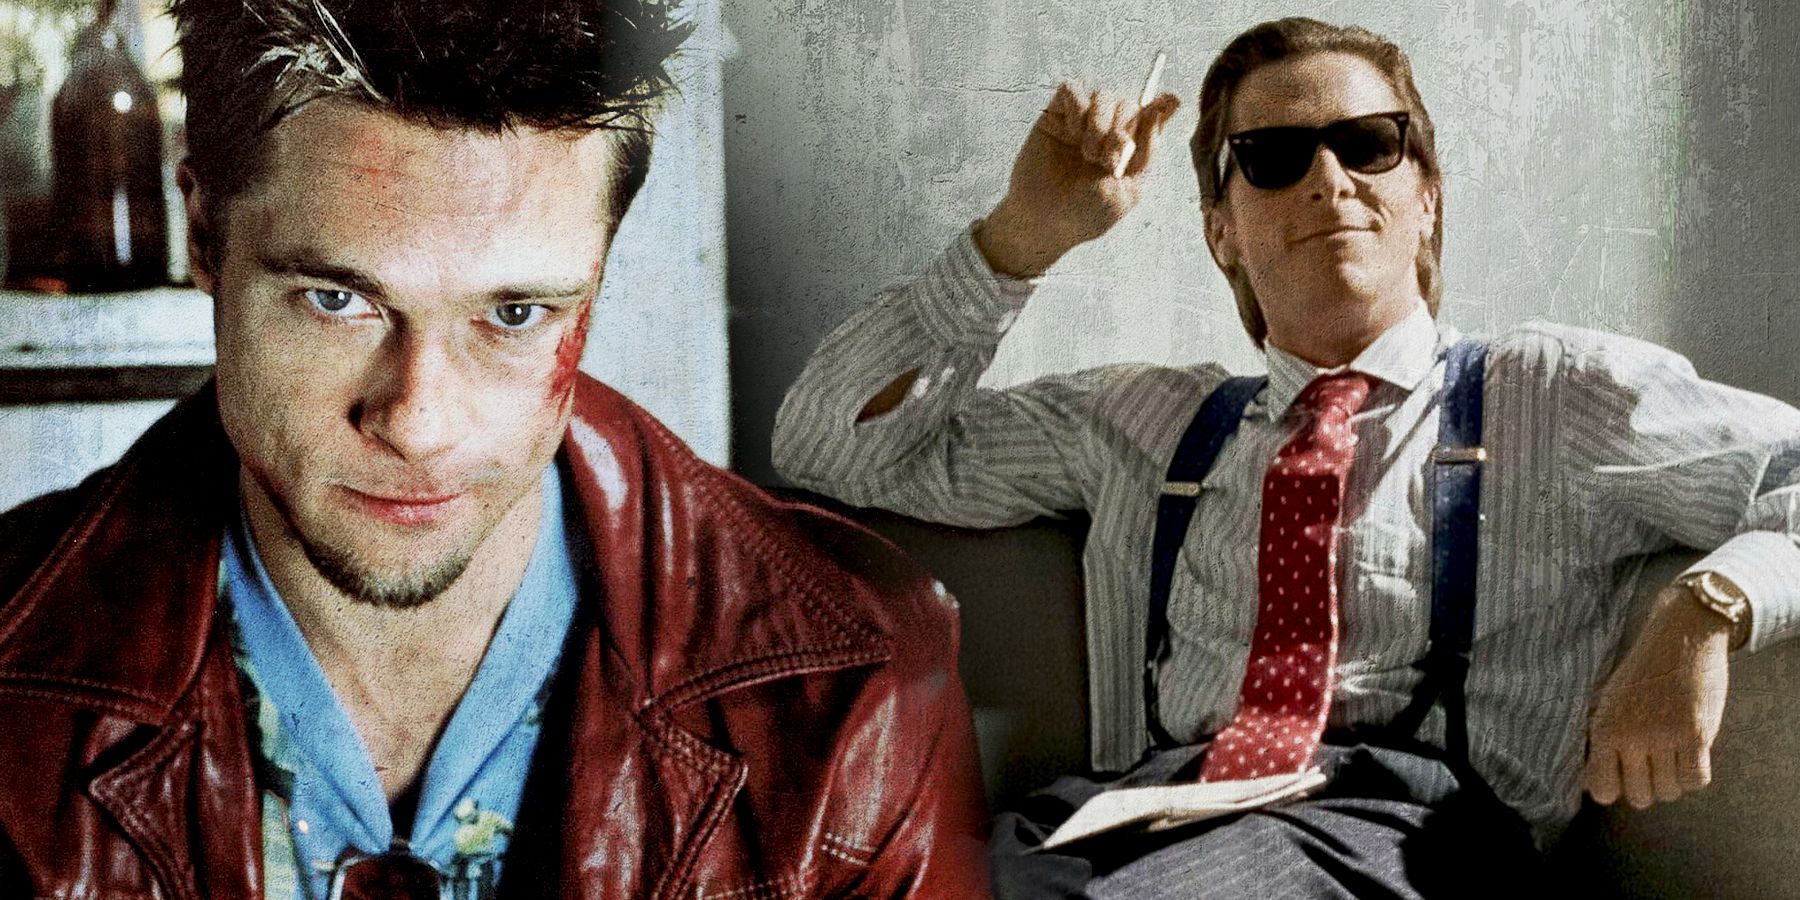 Tyler Durden from Fight Club and Patrick Bateman from American Psycho